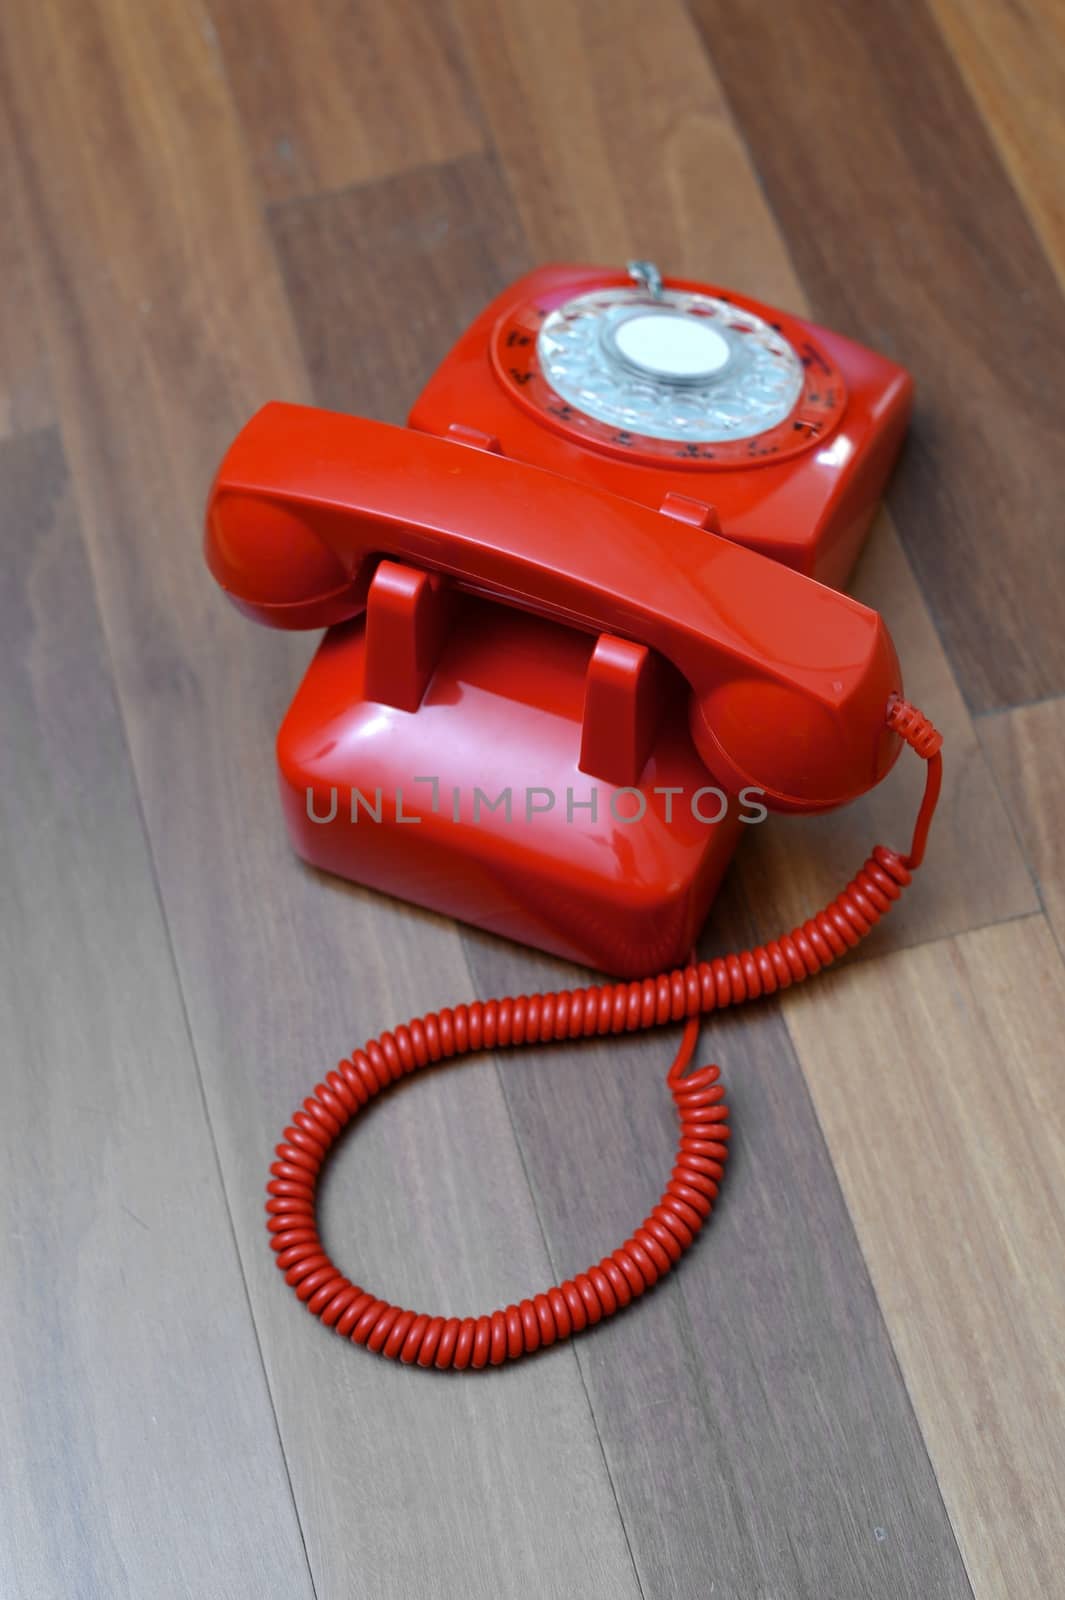 A vintage telephone isolated on a wooden floor